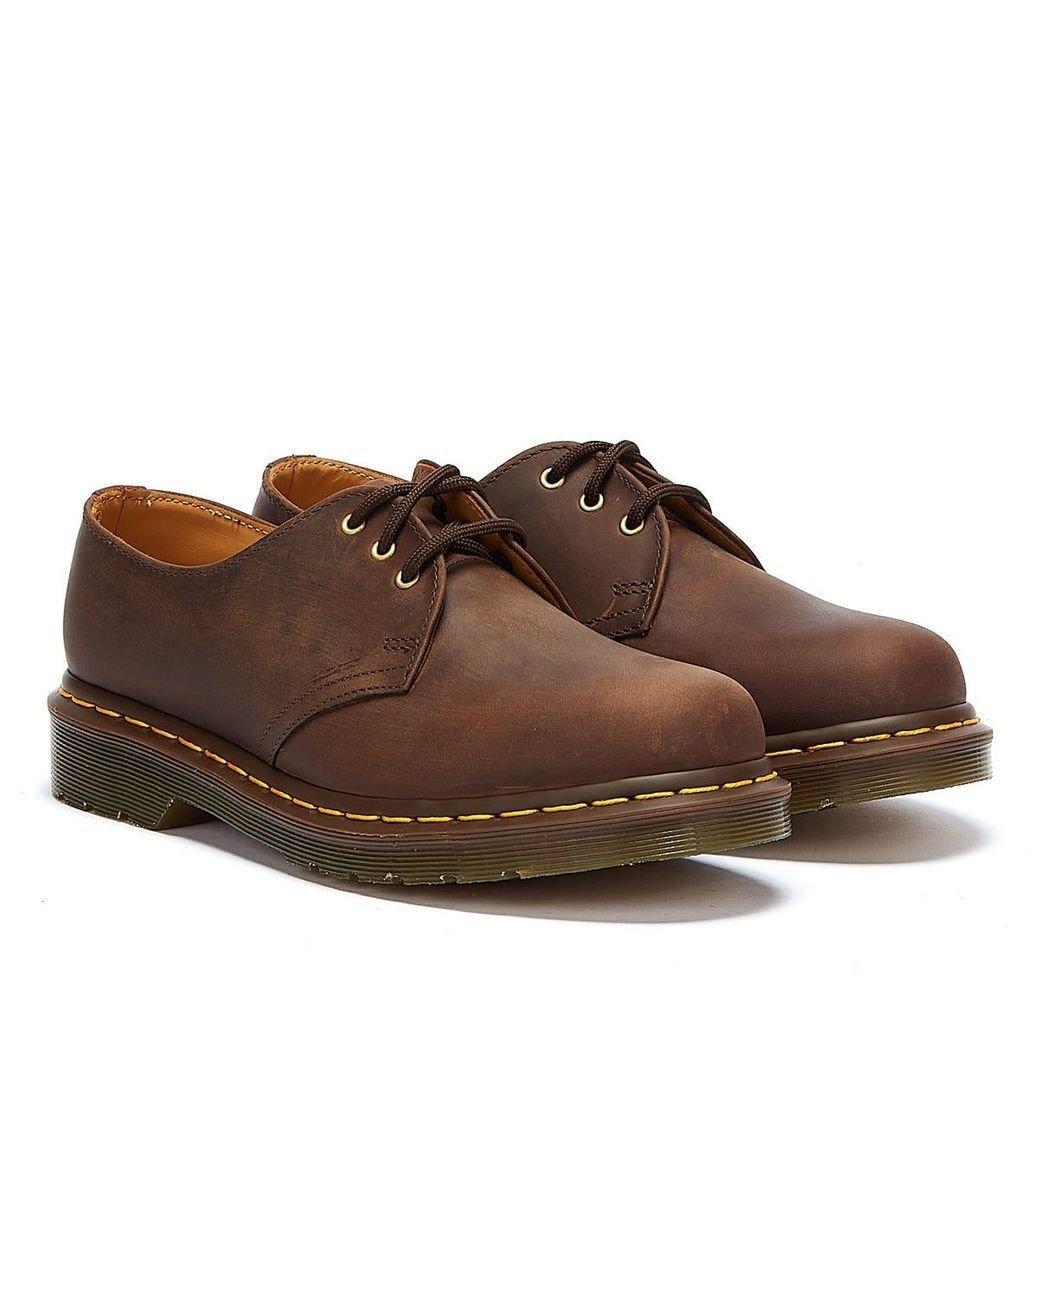 Dr. Martens 1461 Smooth Shoes Classic 3 Eye Lace Up Unisex - Dark Brown - UK 7